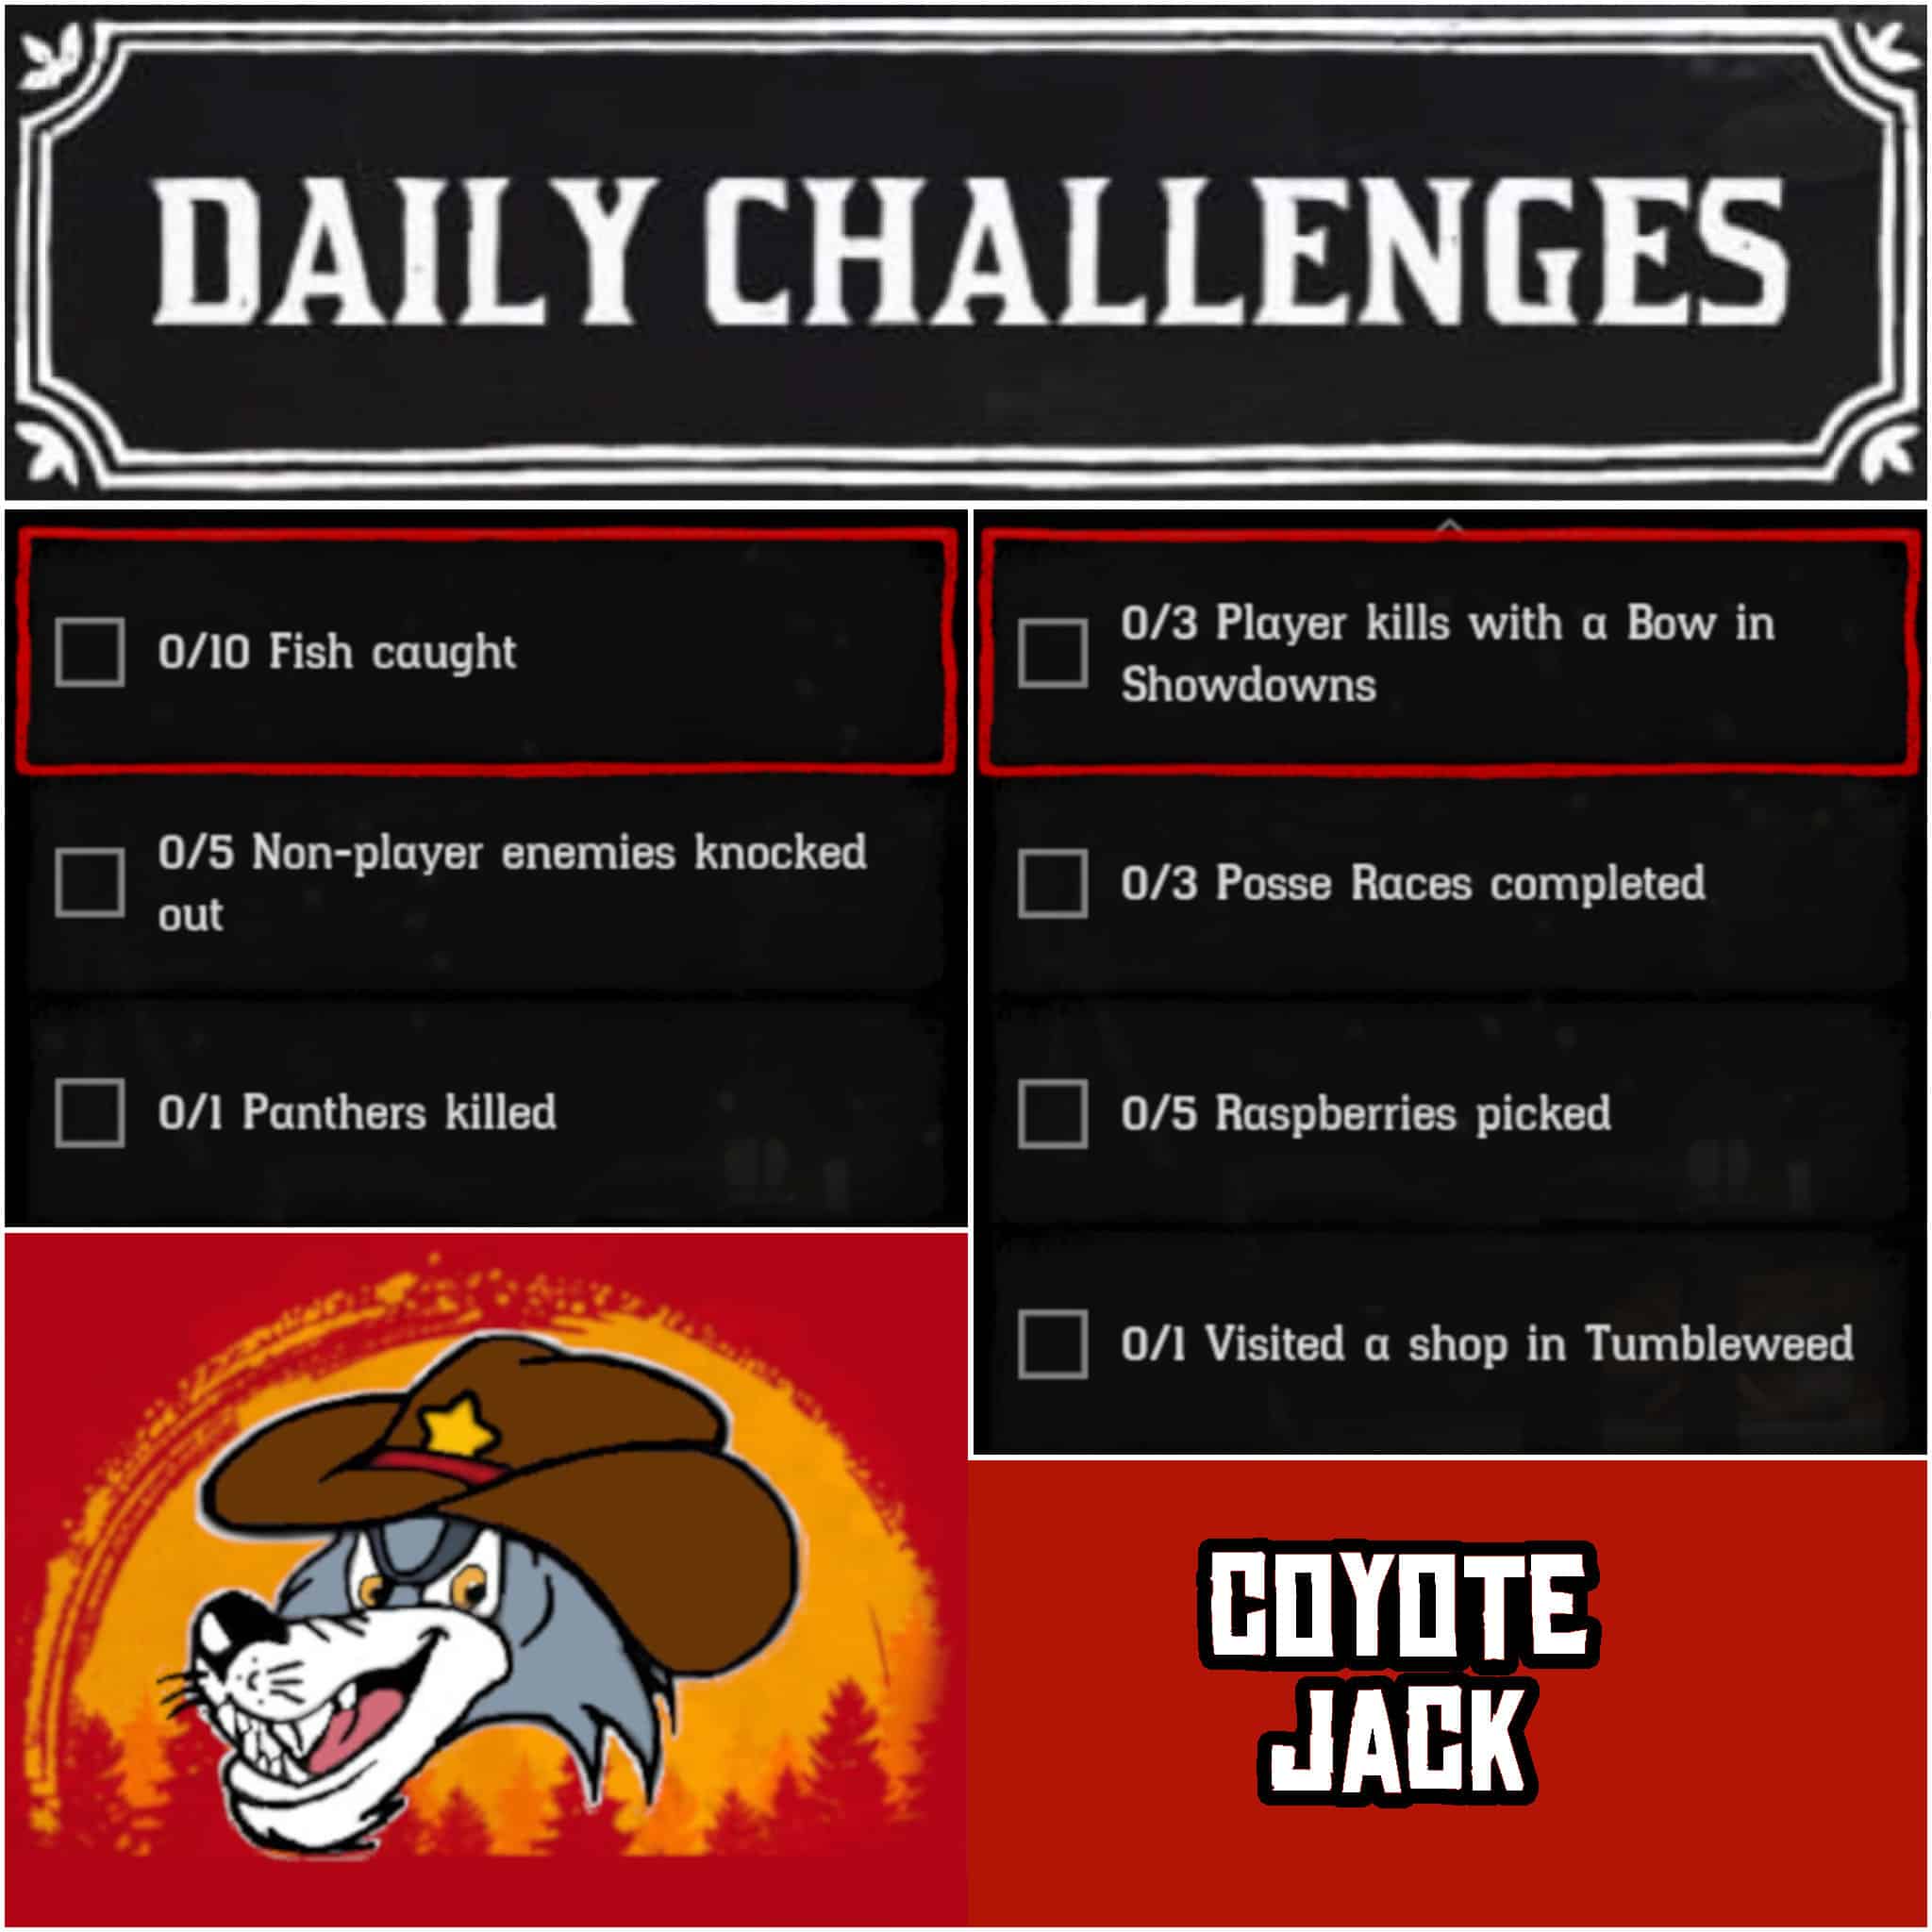 You are currently viewing Monday 04 January Daily Challenges